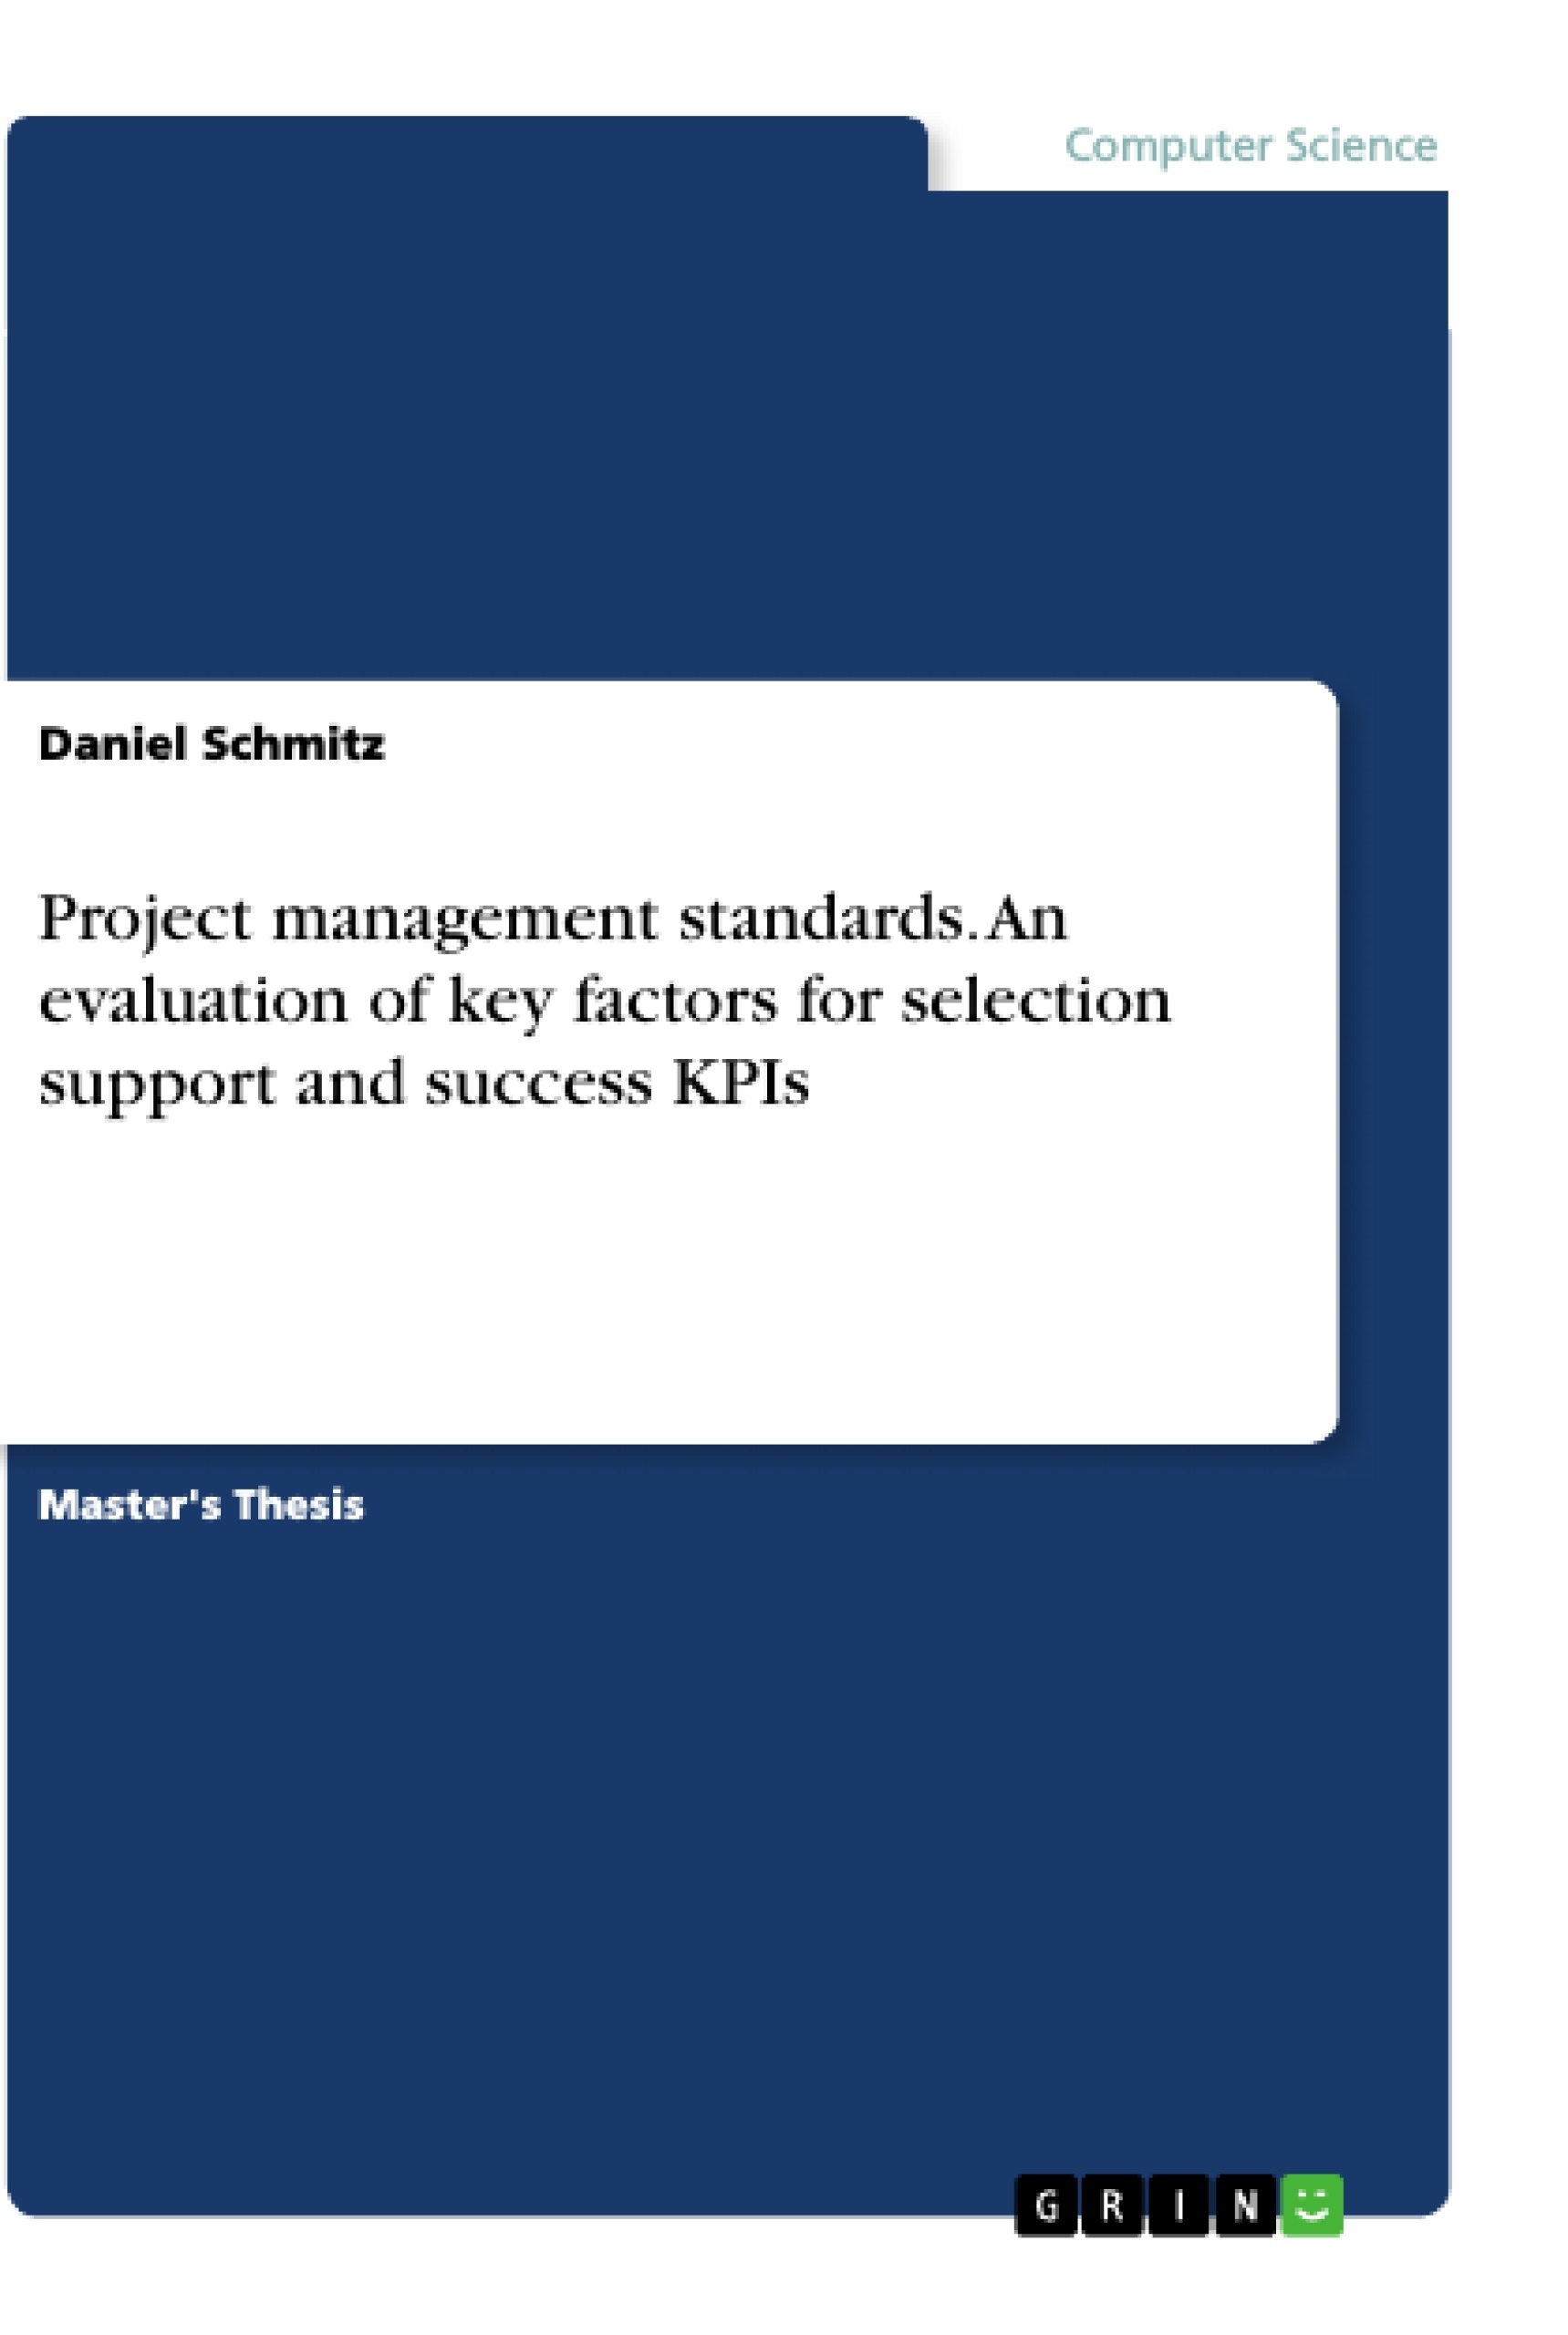 Título: Project management standards. An evaluation of key factors for selection support and success KPIs